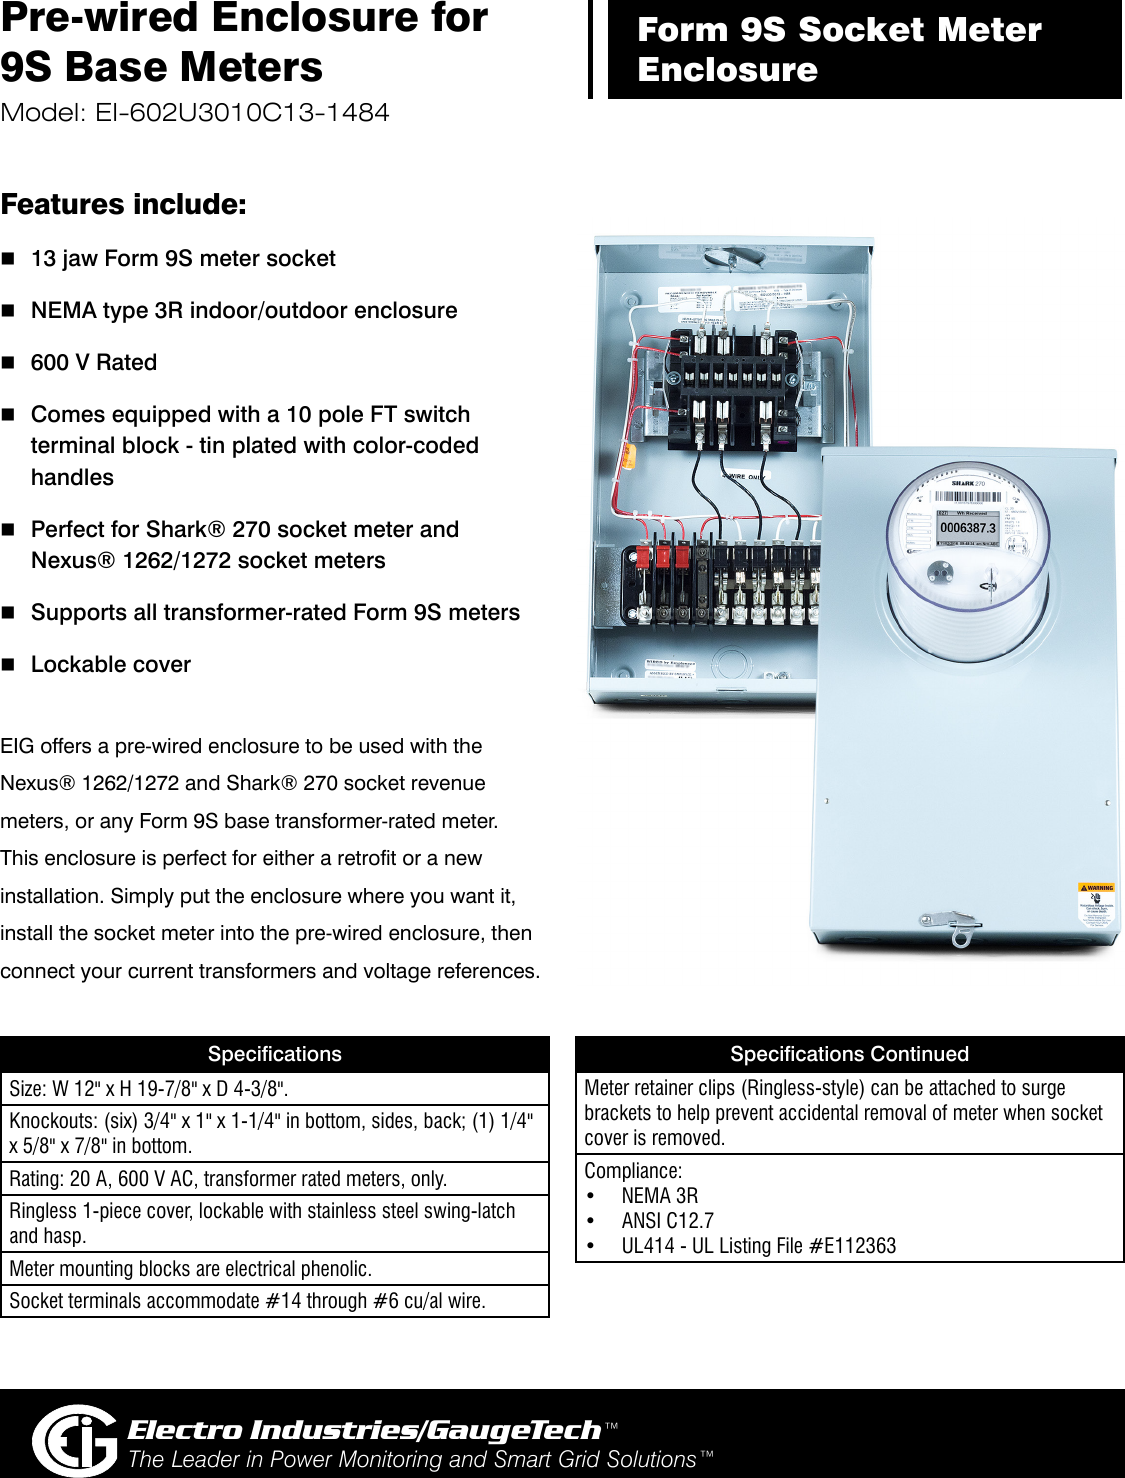 Page 1 of 2 - E159722-Pre-Wired-Enclosure-for-9S-Base-Meters-brochure-010417 V1 01-web